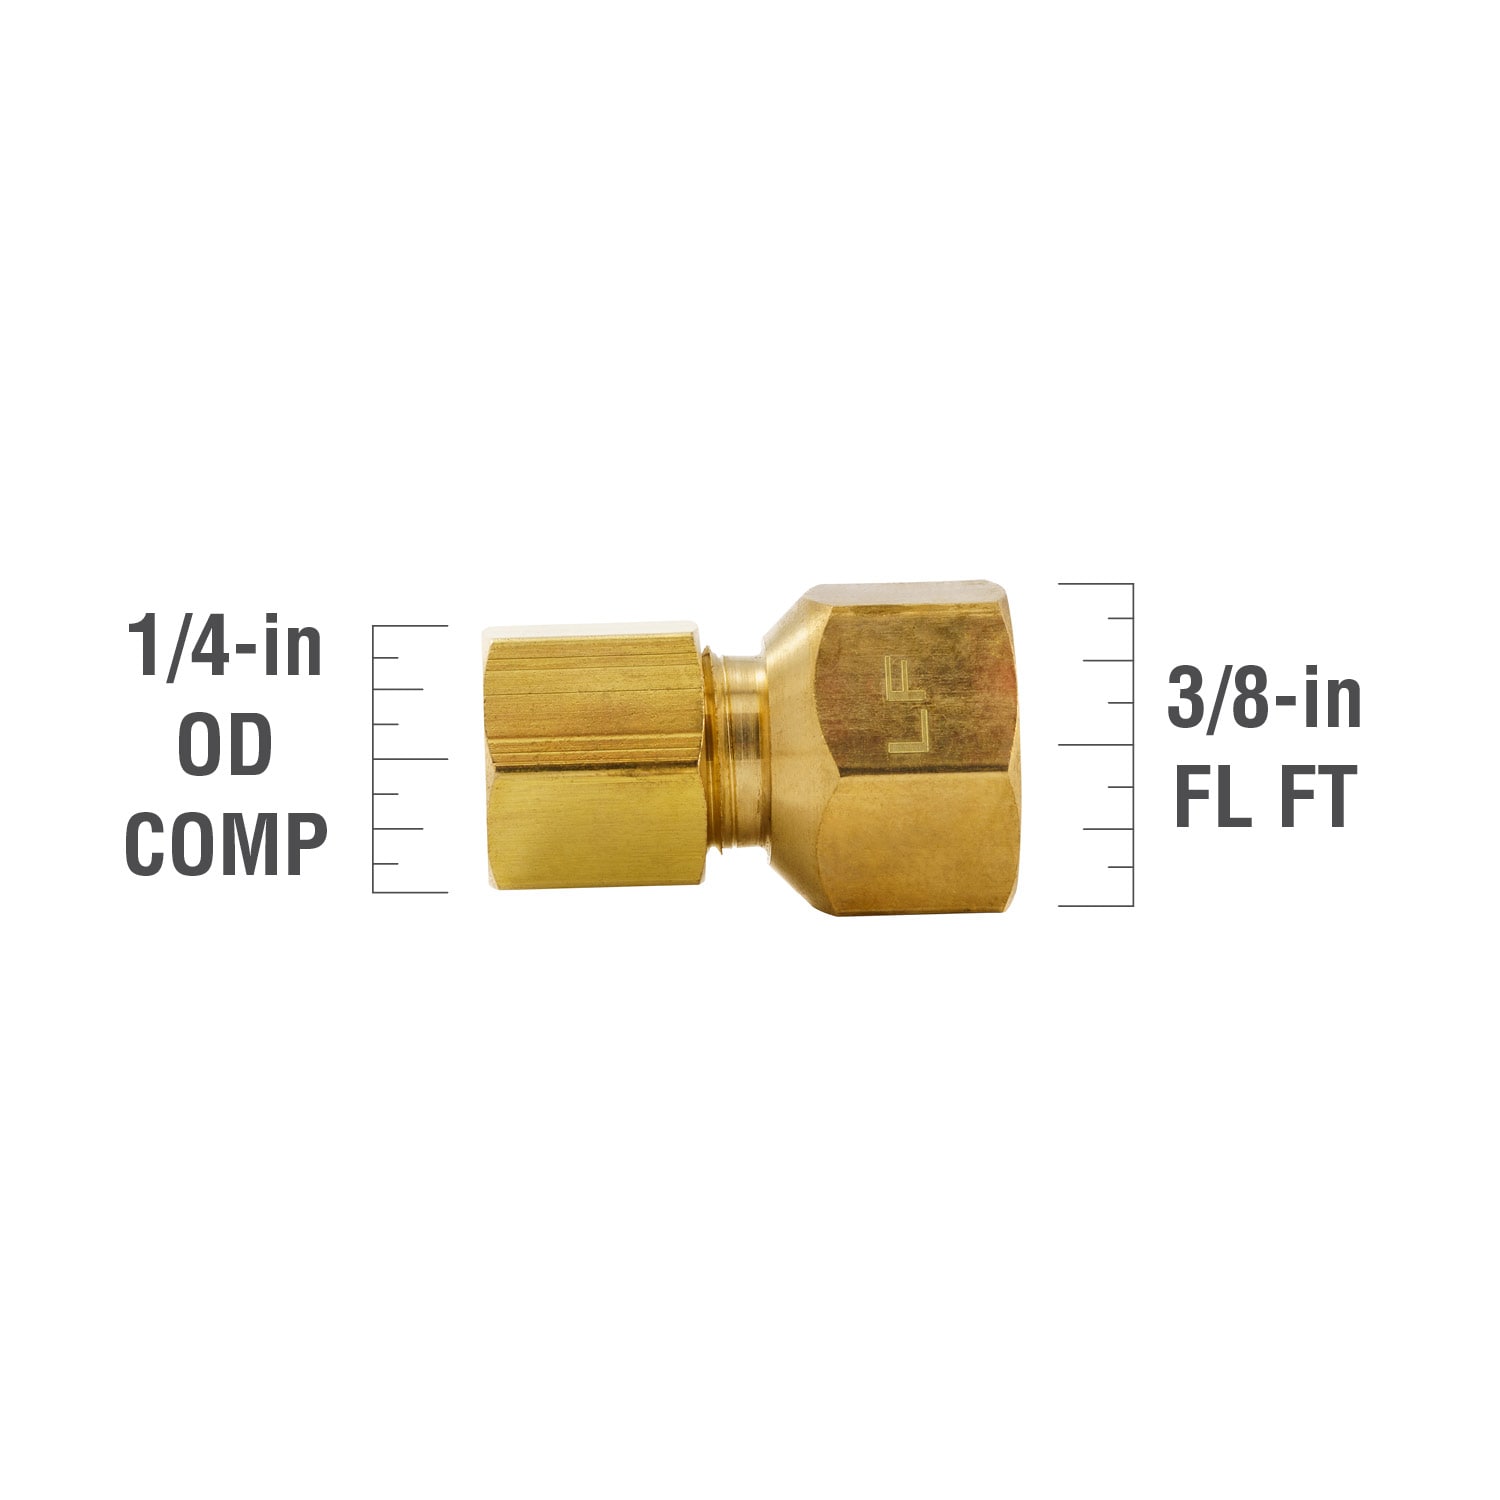 Brass Compression Tube Pipe Fitting Connector, Straight Coupling Adapter,  3/8 Tube OD x 1/4 NPT Male Connector 5pcs (3/8 OD Compression x 1/4 NPT